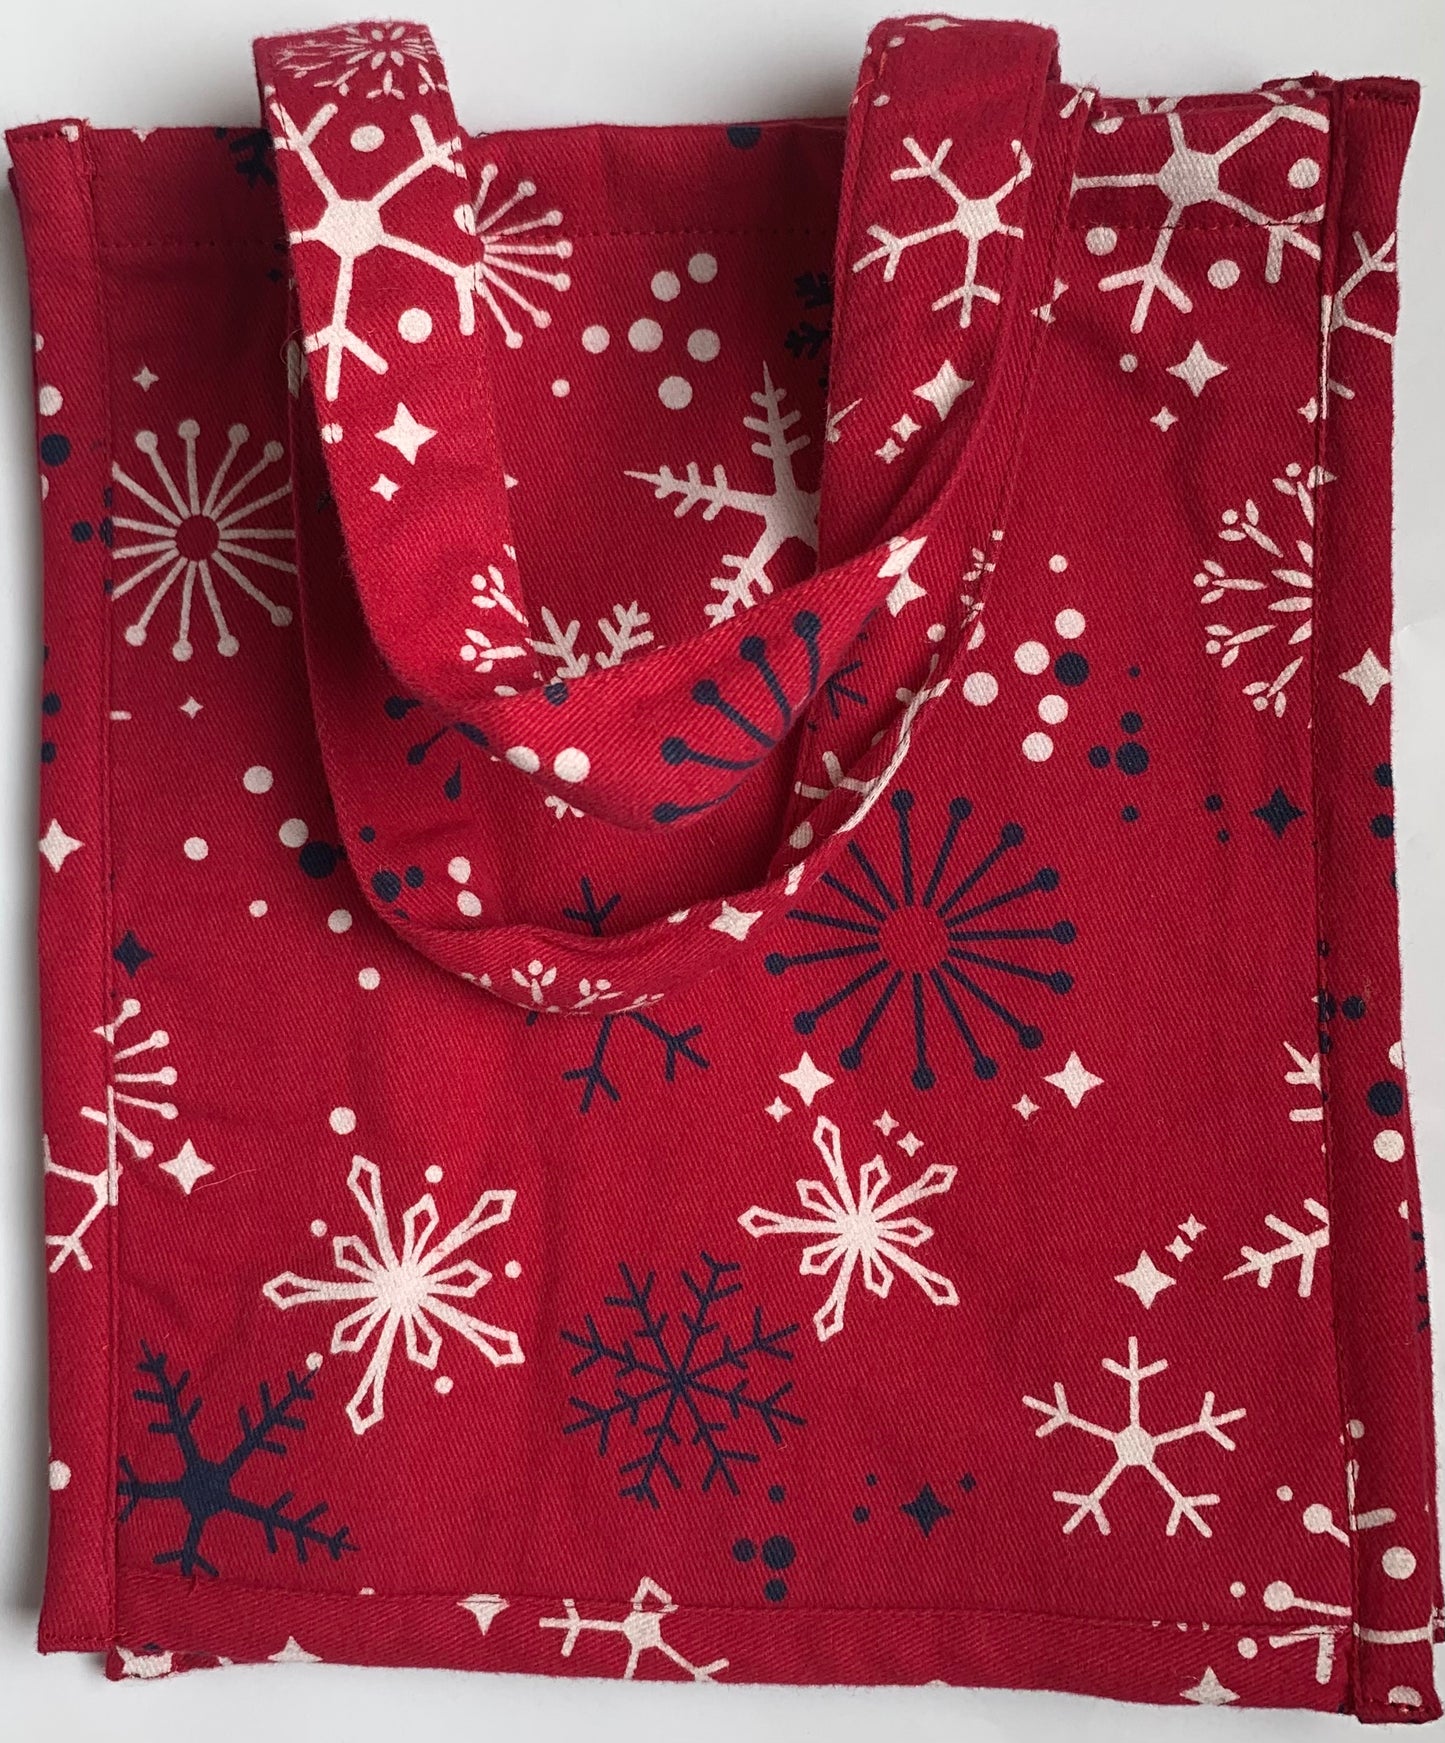 Snow Flakes on Red Gift Bag